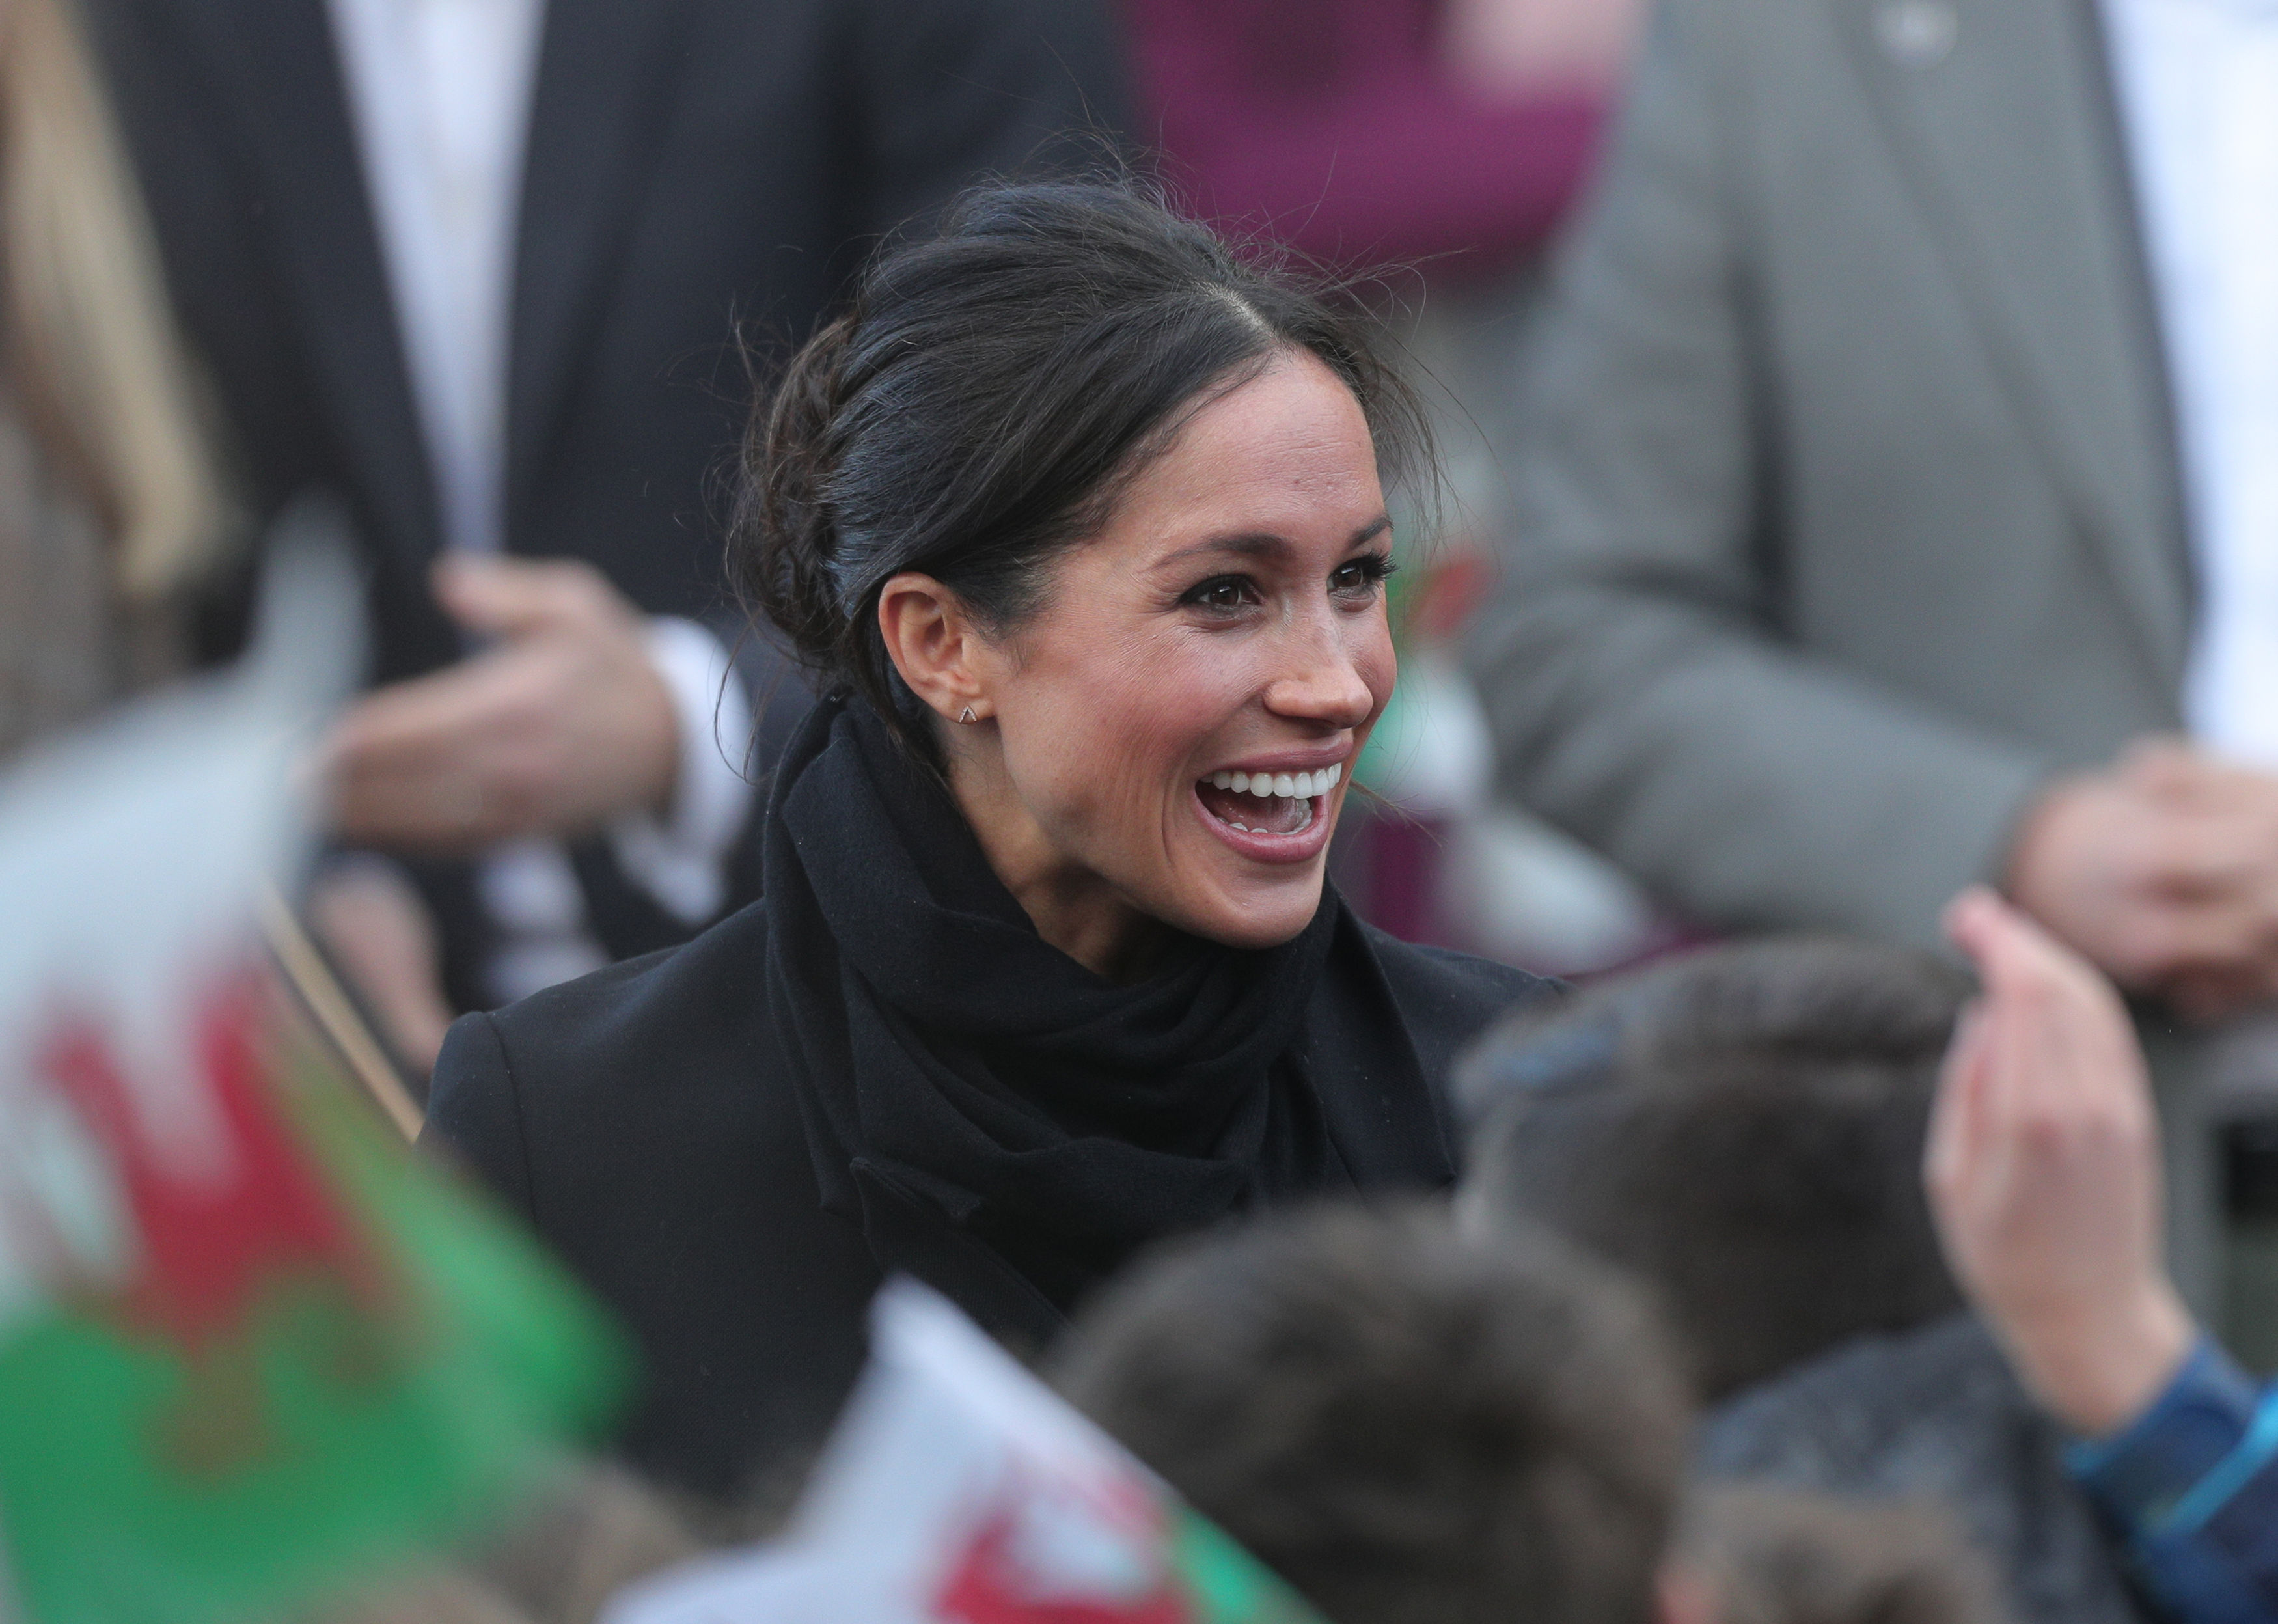 Meghan Markle arrive for a visit at Cardiff Castle with Prince Harry (Aaron Chown/PA)